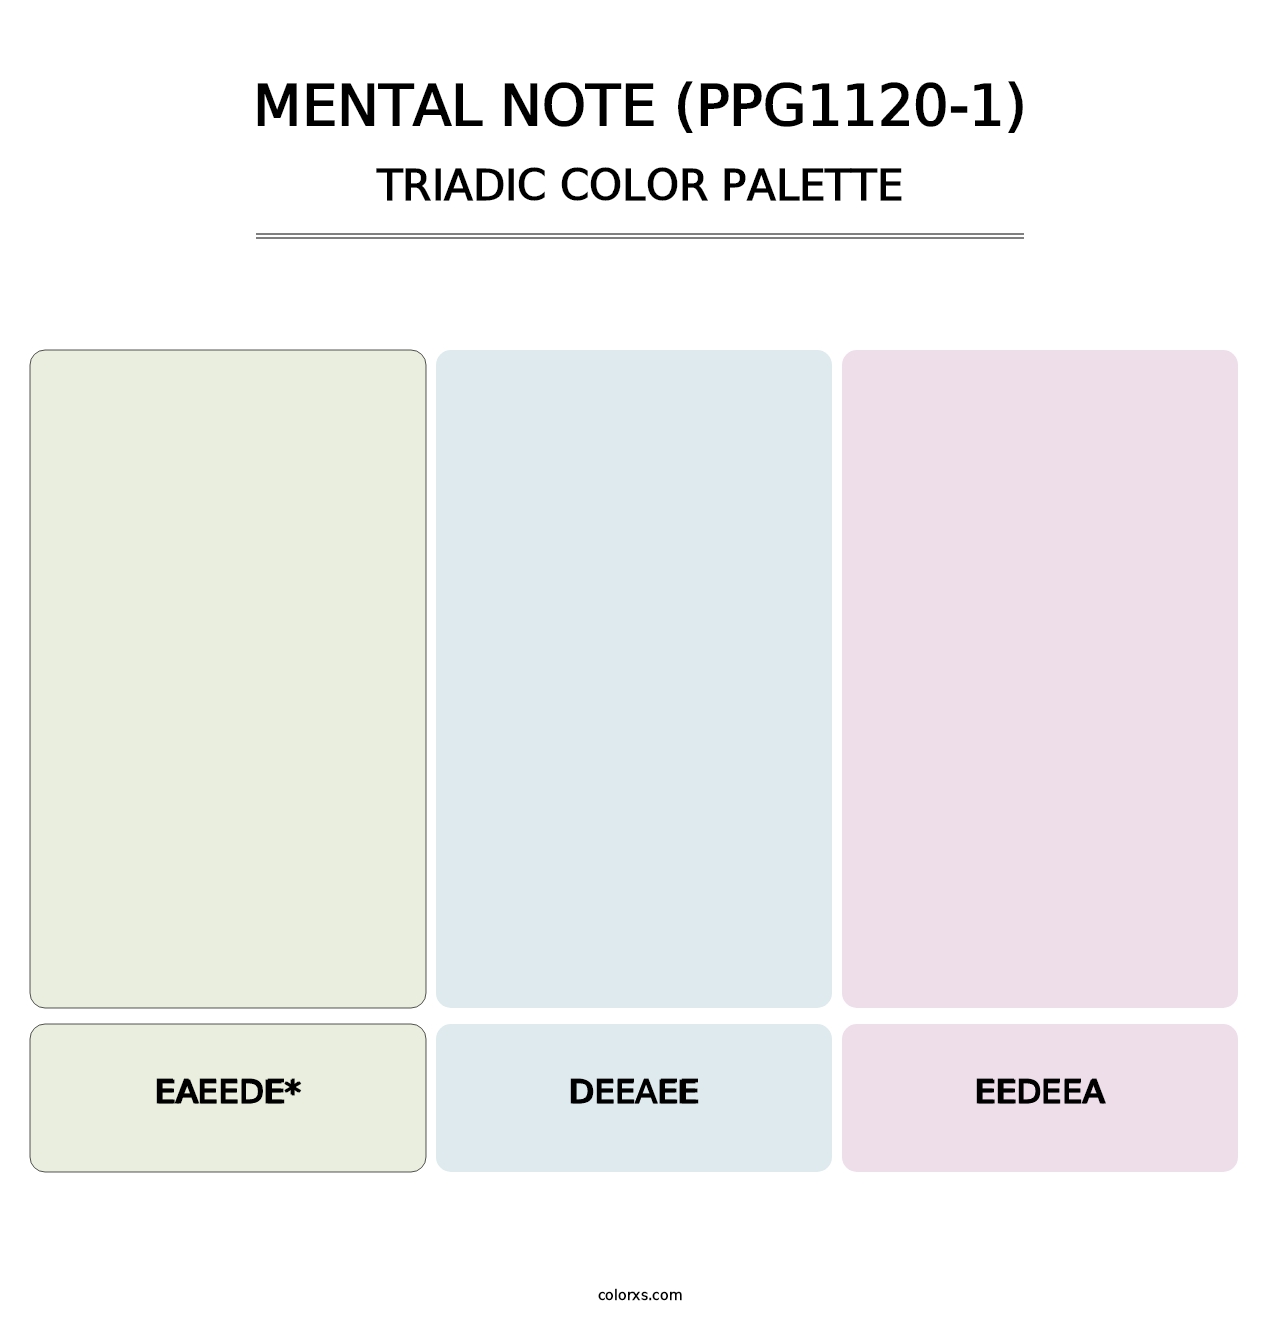 Mental Note (PPG1120-1) - Triadic Color Palette